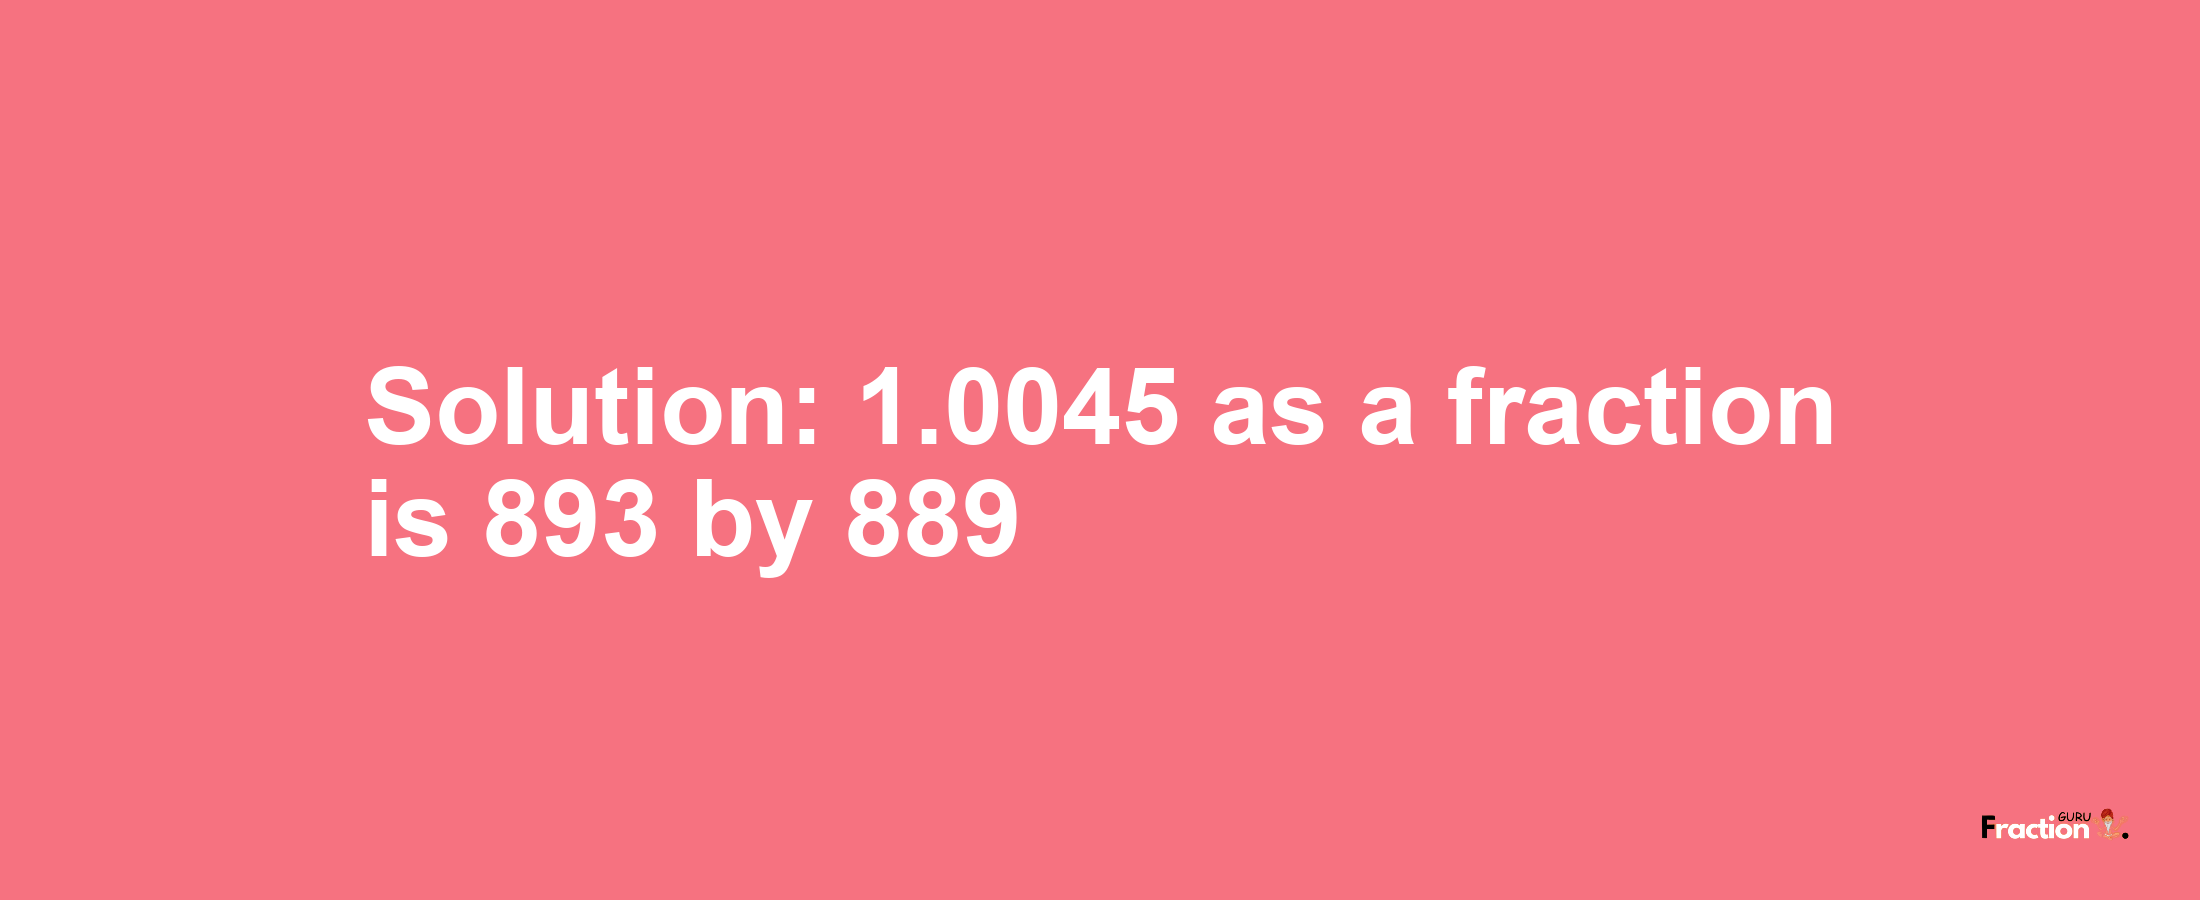 Solution:1.0045 as a fraction is 893/889